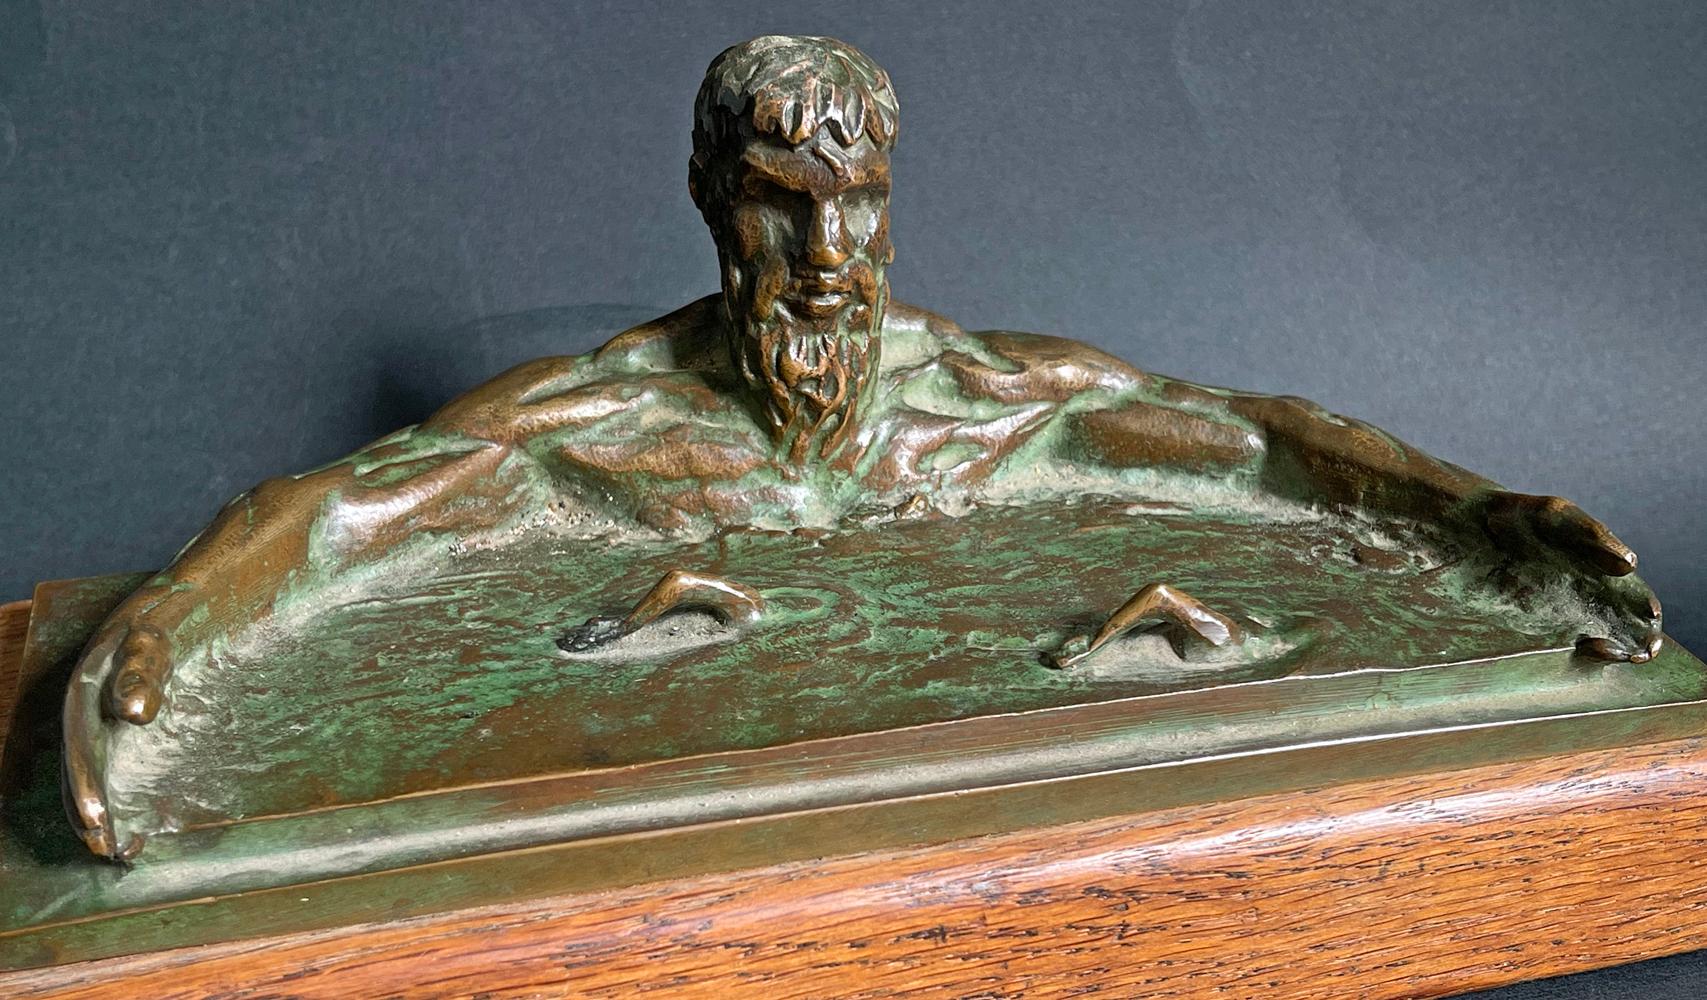 Enormously important, both artistically and historically, this unique bronze depicting a monumental Poseidon figure calming the sea and making space for swimmers to complete below, was sculpted by Joe Brown at the behest of the Amateur Athletic